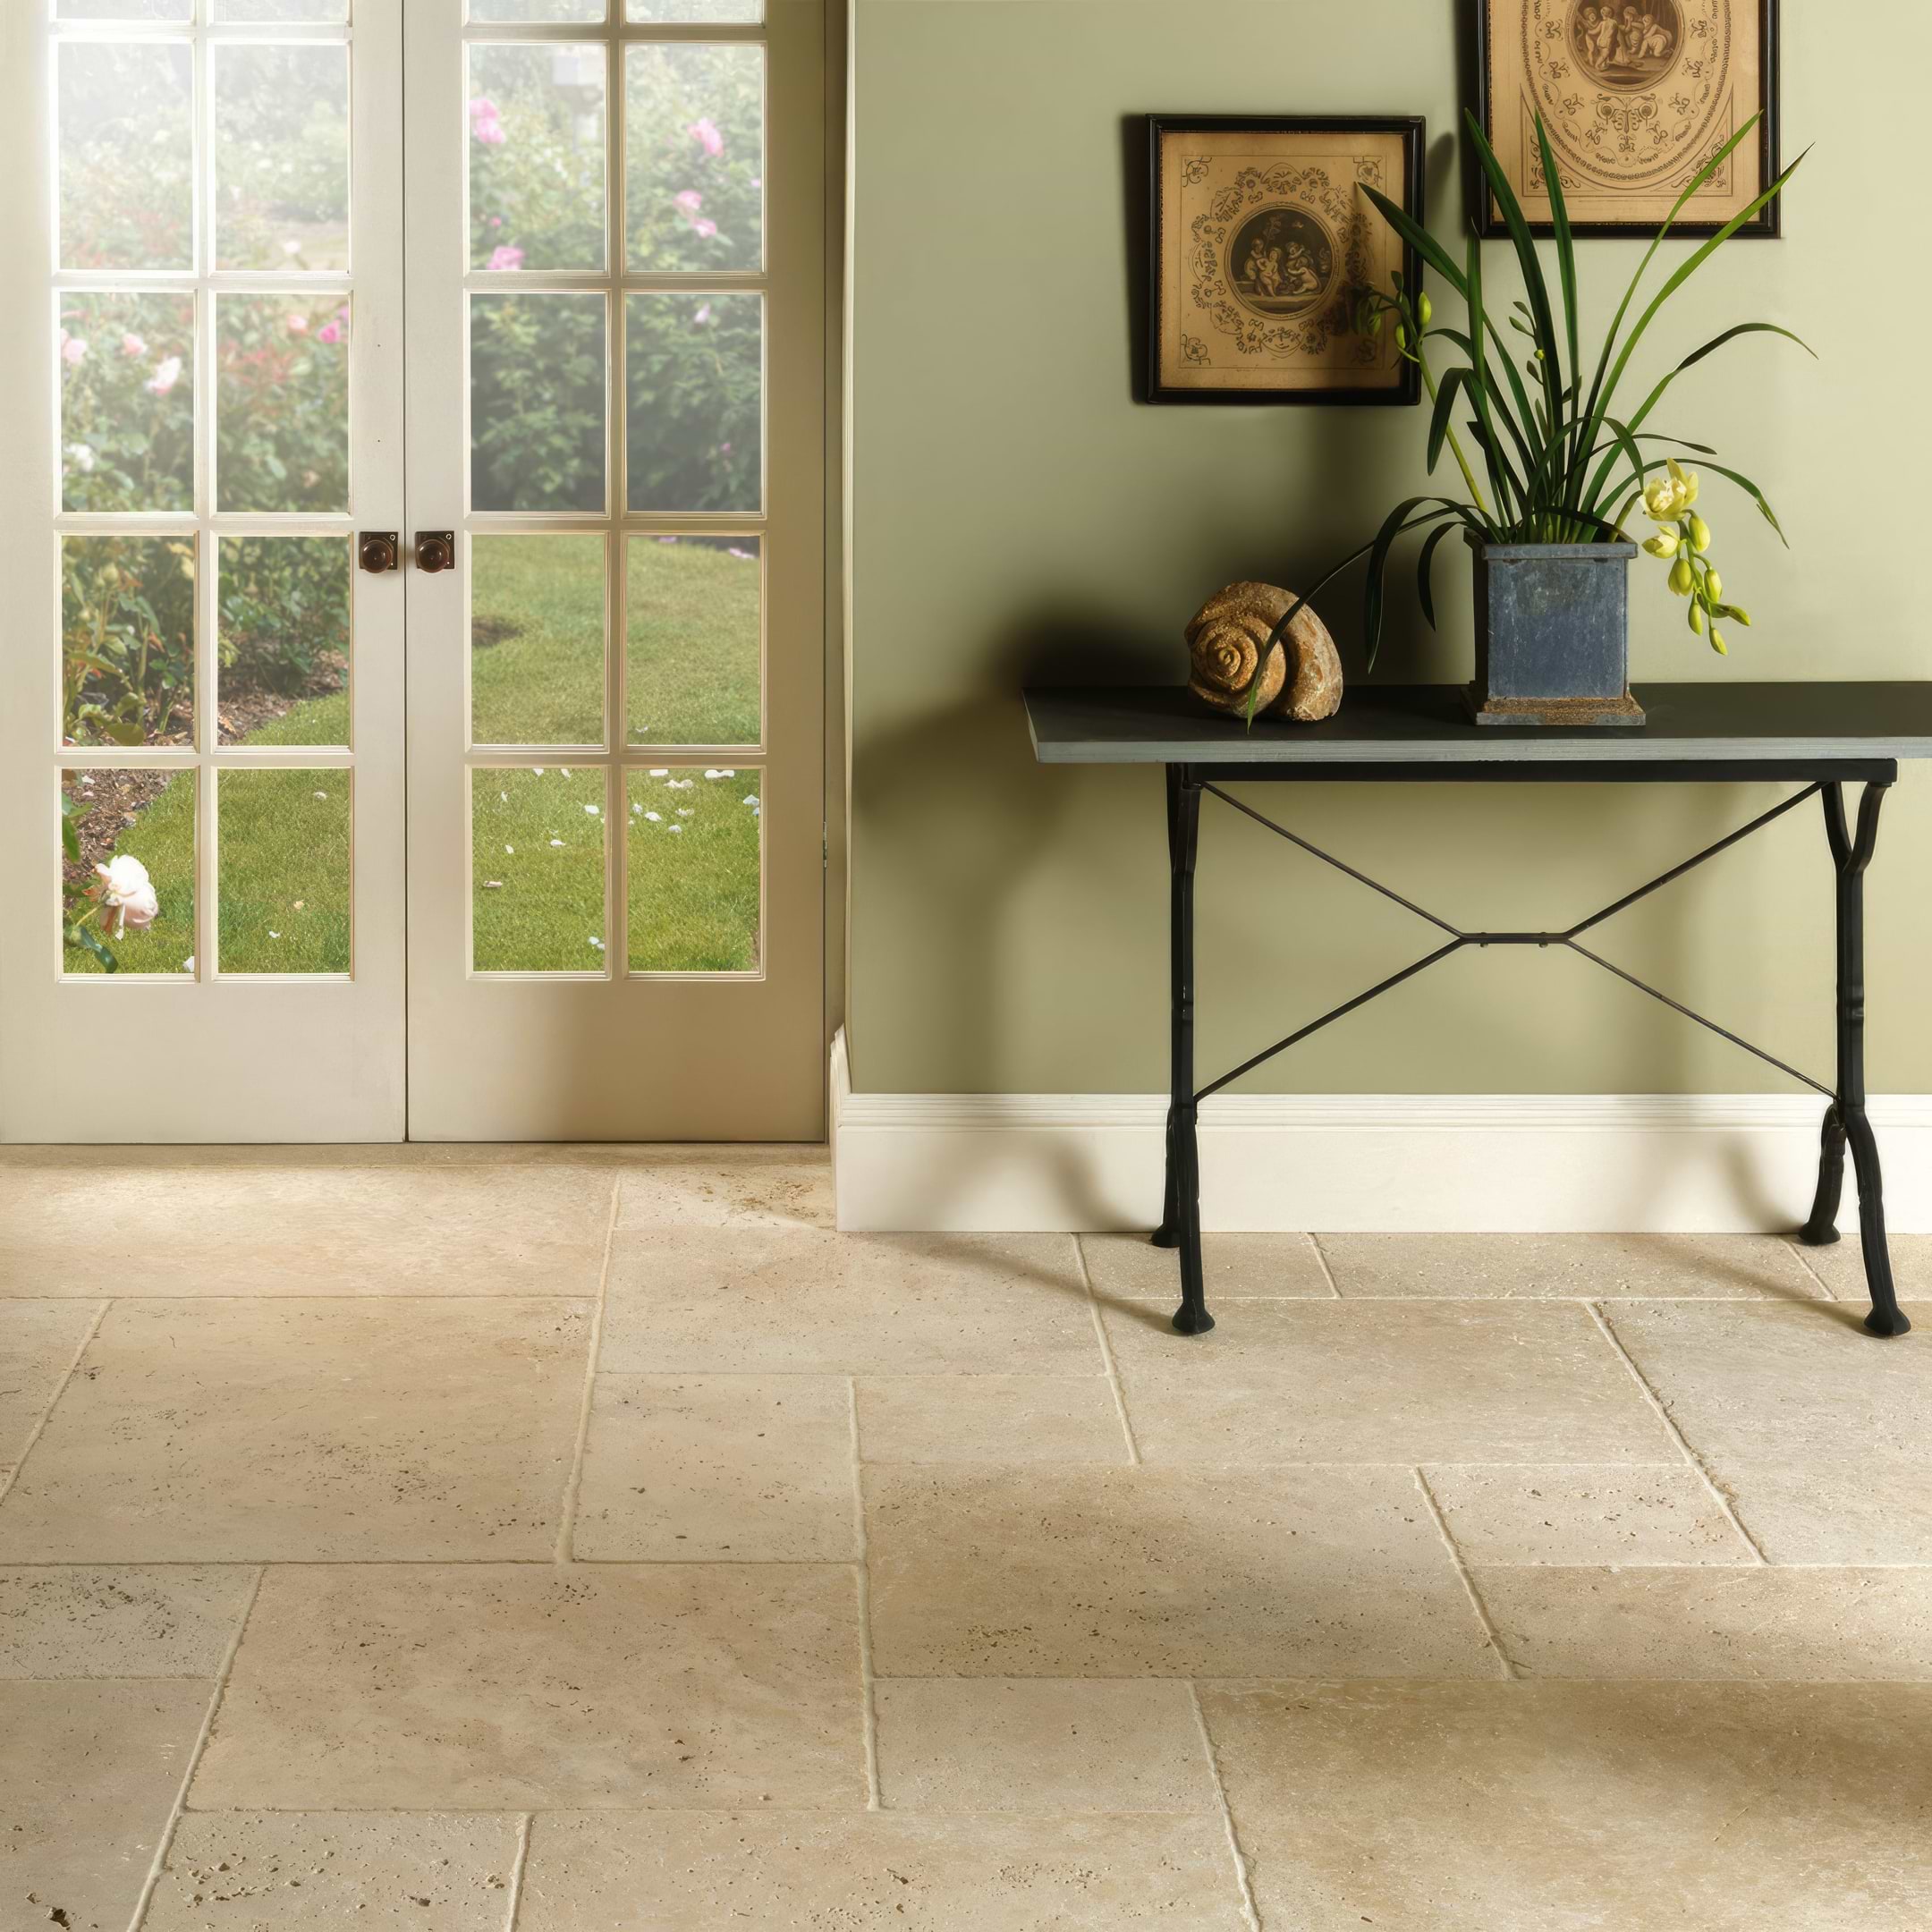 Levantine Ivory Manor Set Unfilled & Tumbled Travertine - Hyperion Tiles